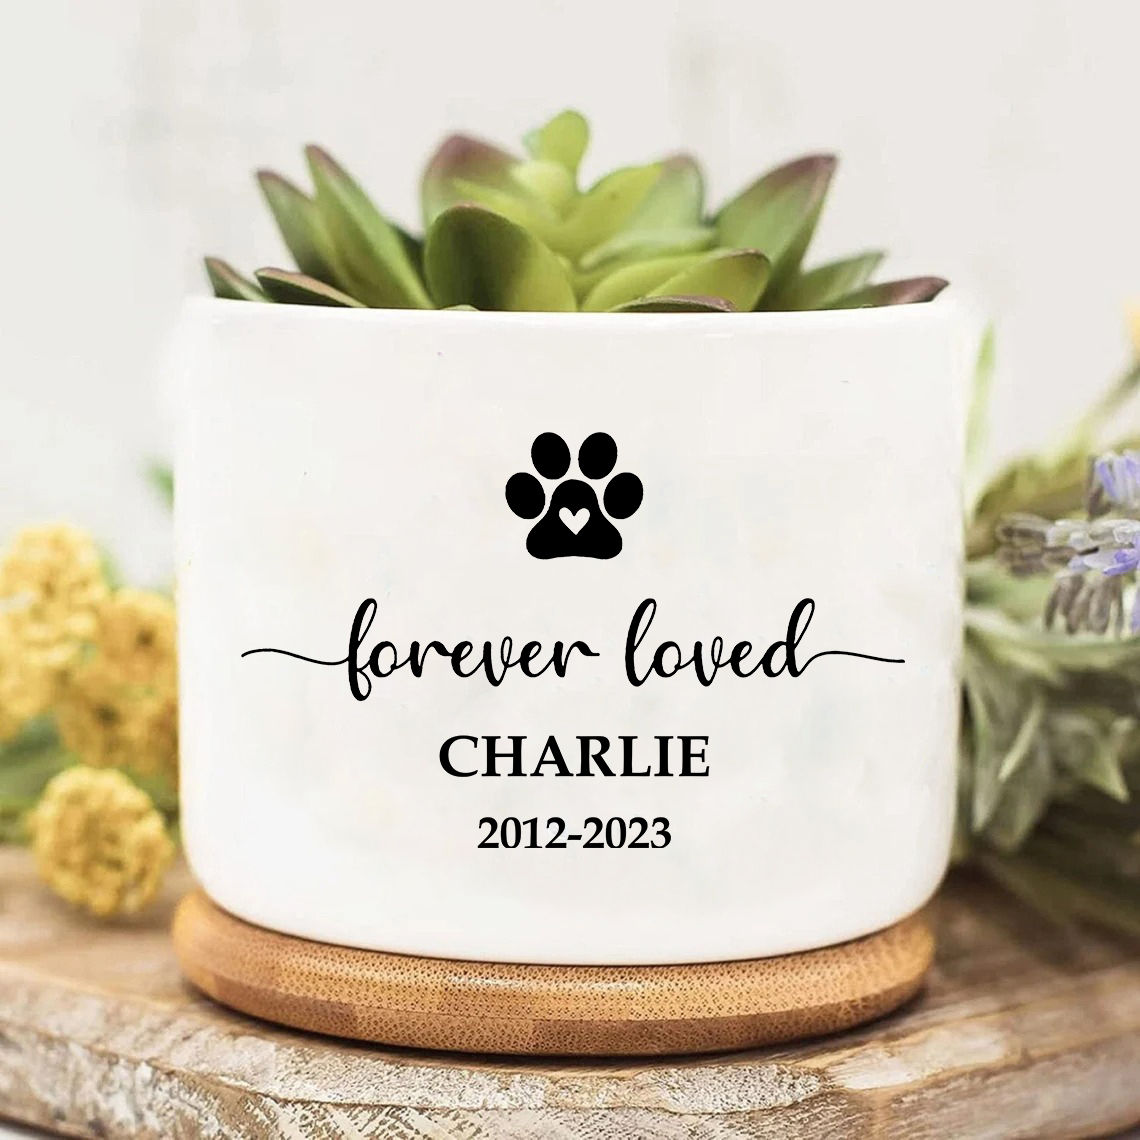 Flowers Plant Pot - Dog Memorial Gifts Plant Pot -Sympathy Gifts for Dog  Loss, Pet Passing Away Gifts, Mom Grandma's Garden